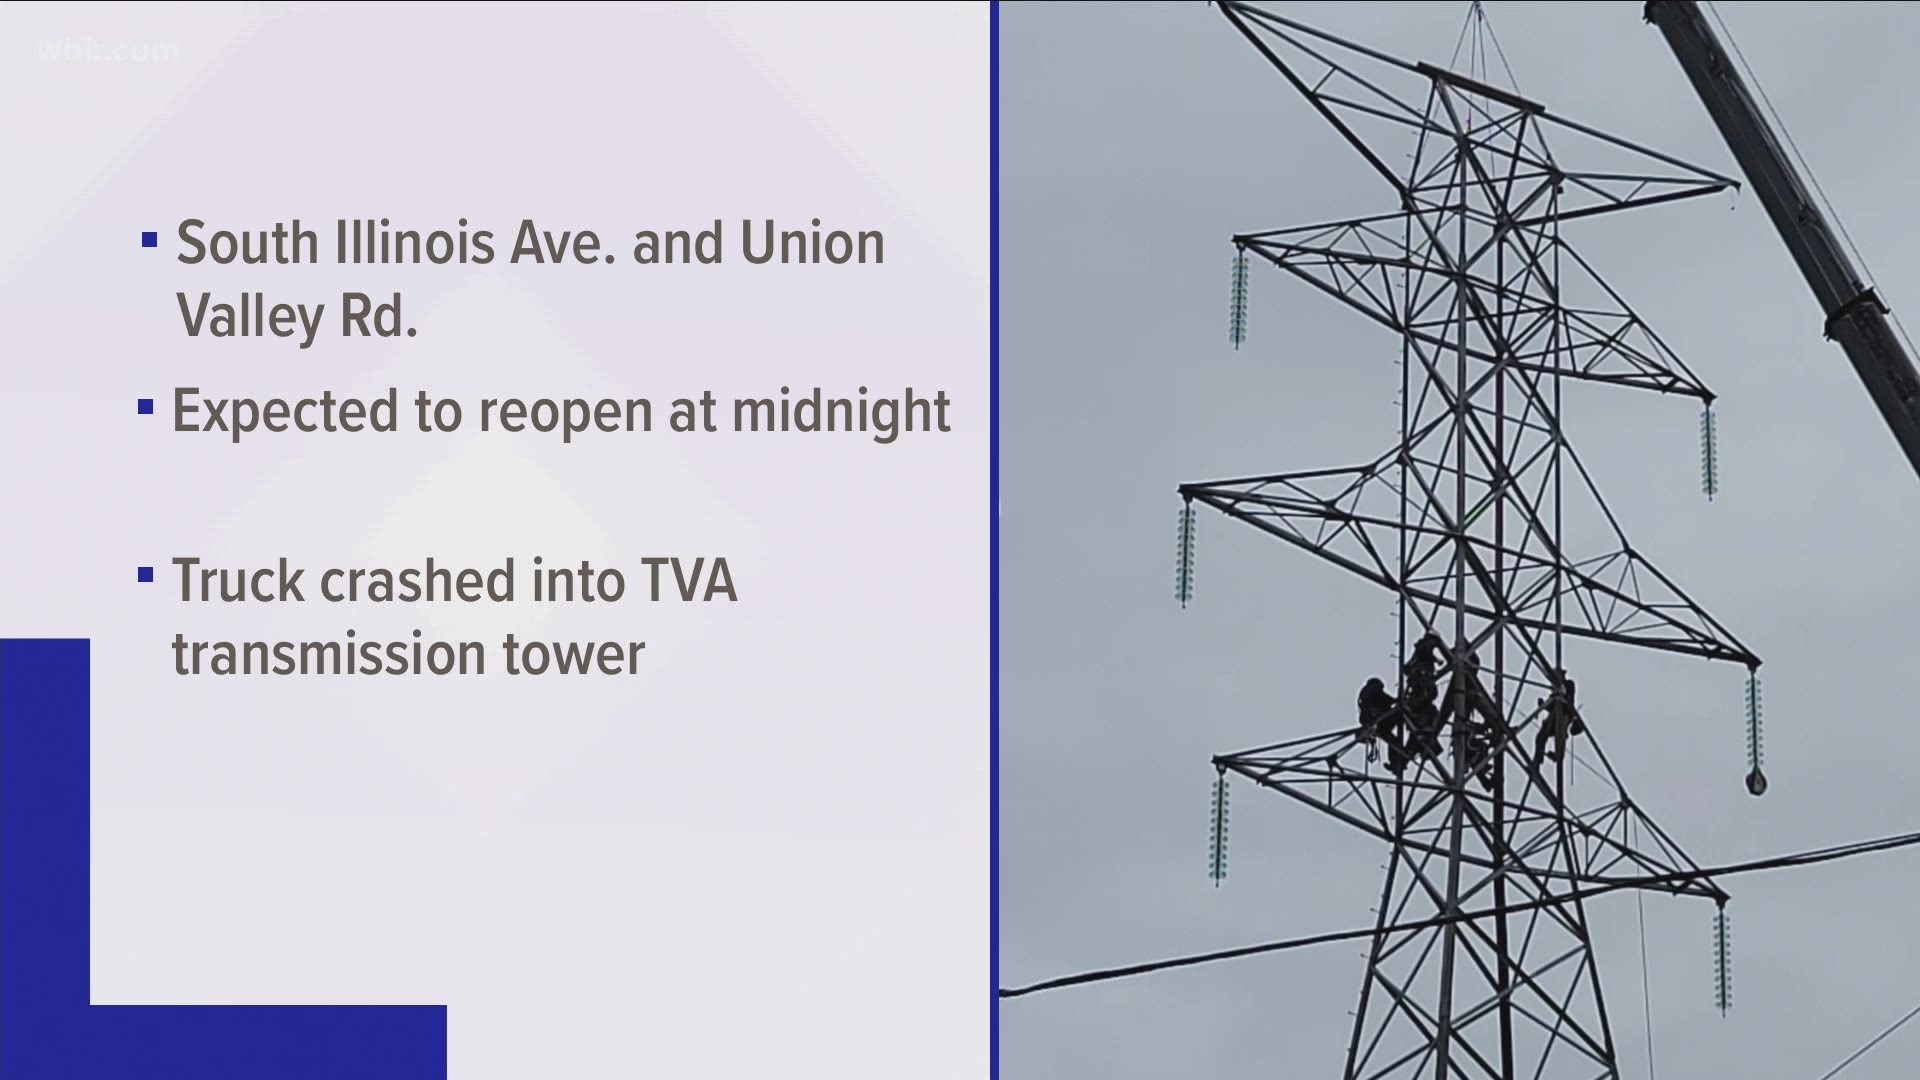 The city says the roadway was closed since Friday after a truck crashed into a TVA transmission tower.